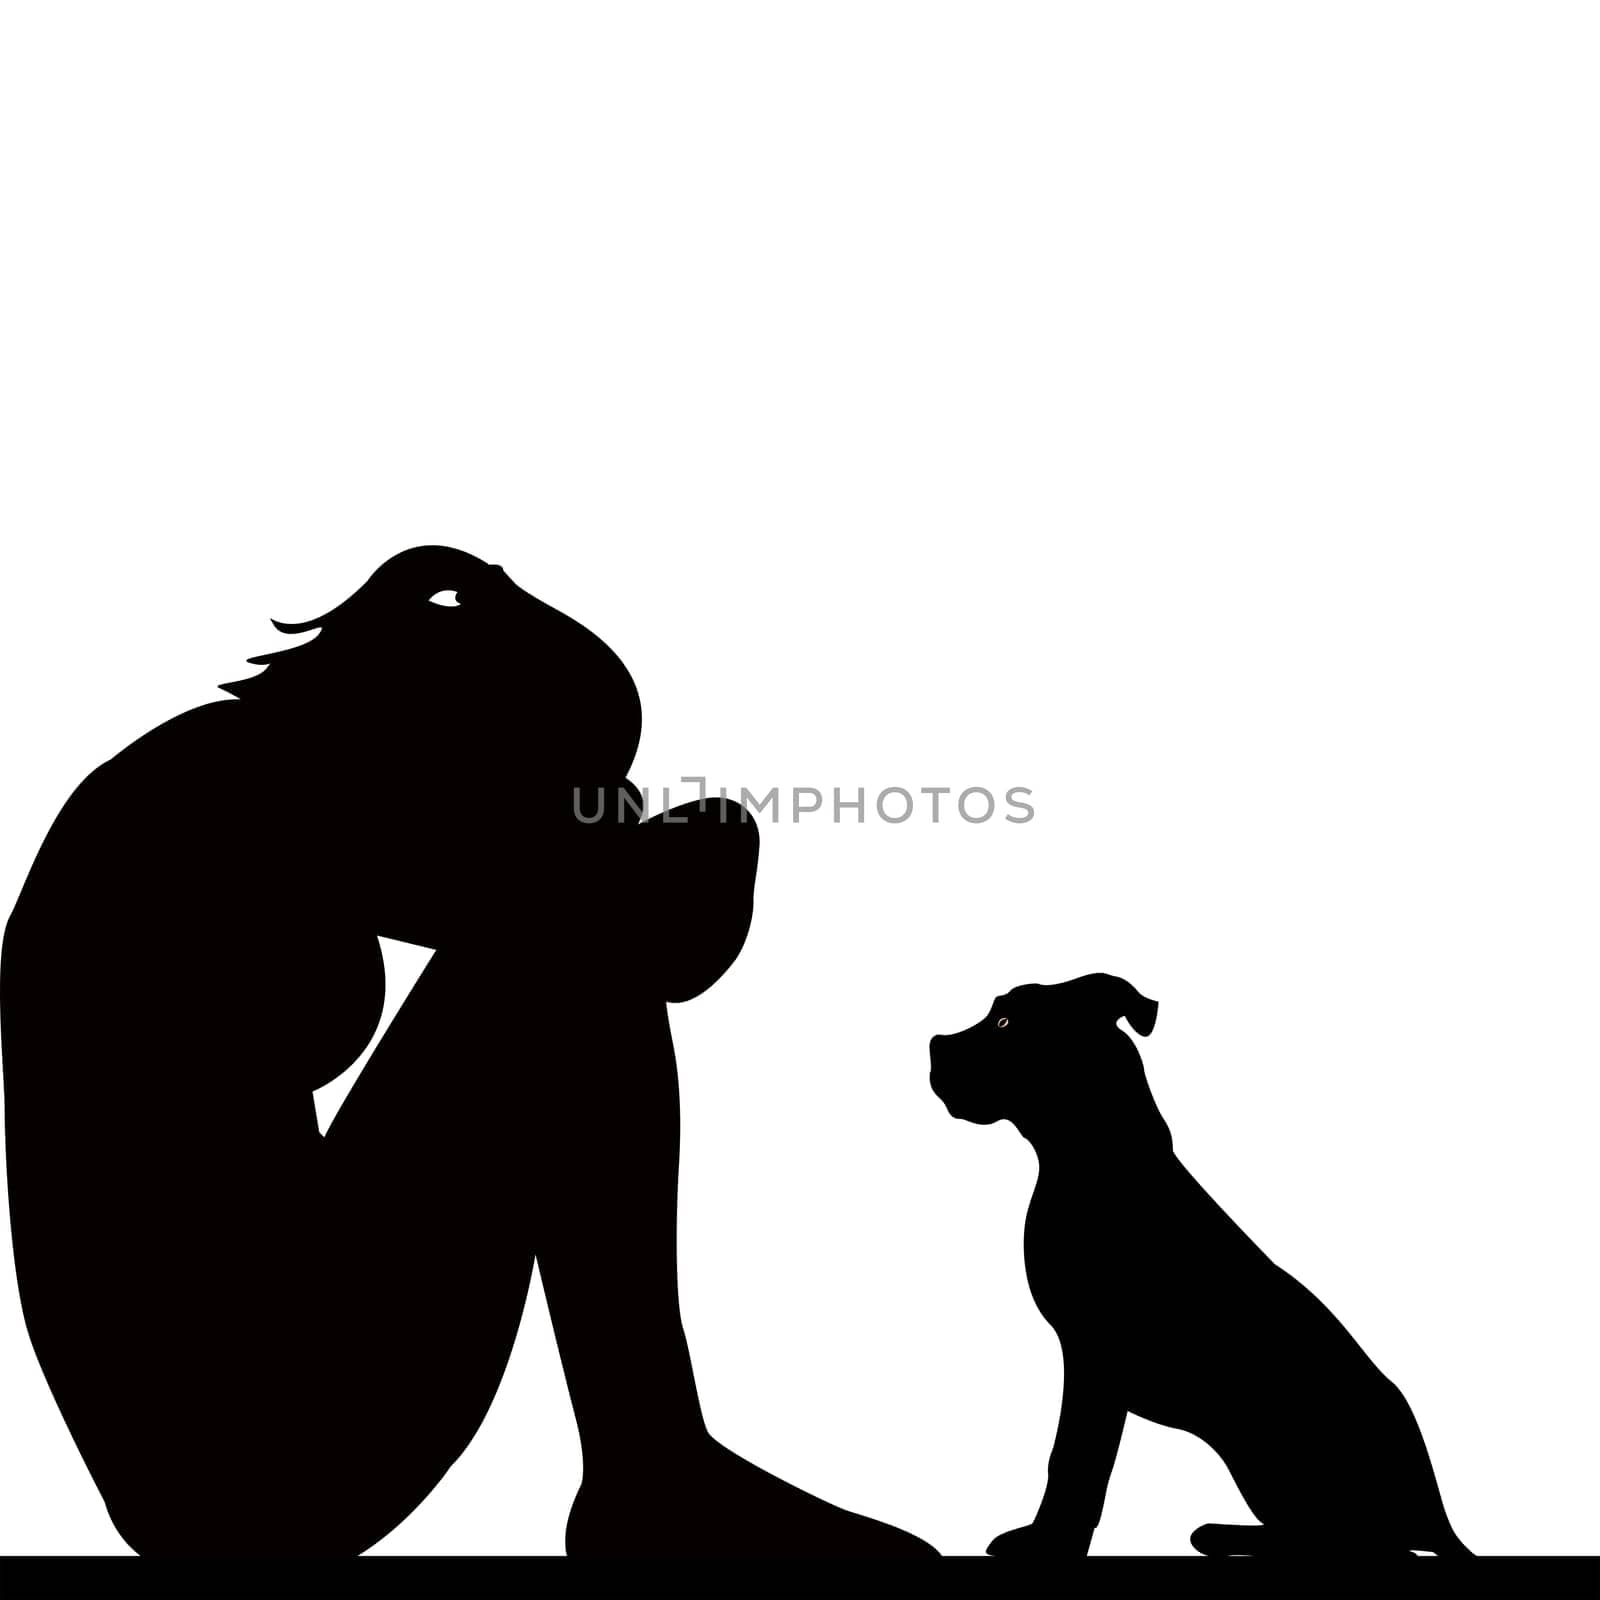 Sad woman silhouette with dog by hibrida13